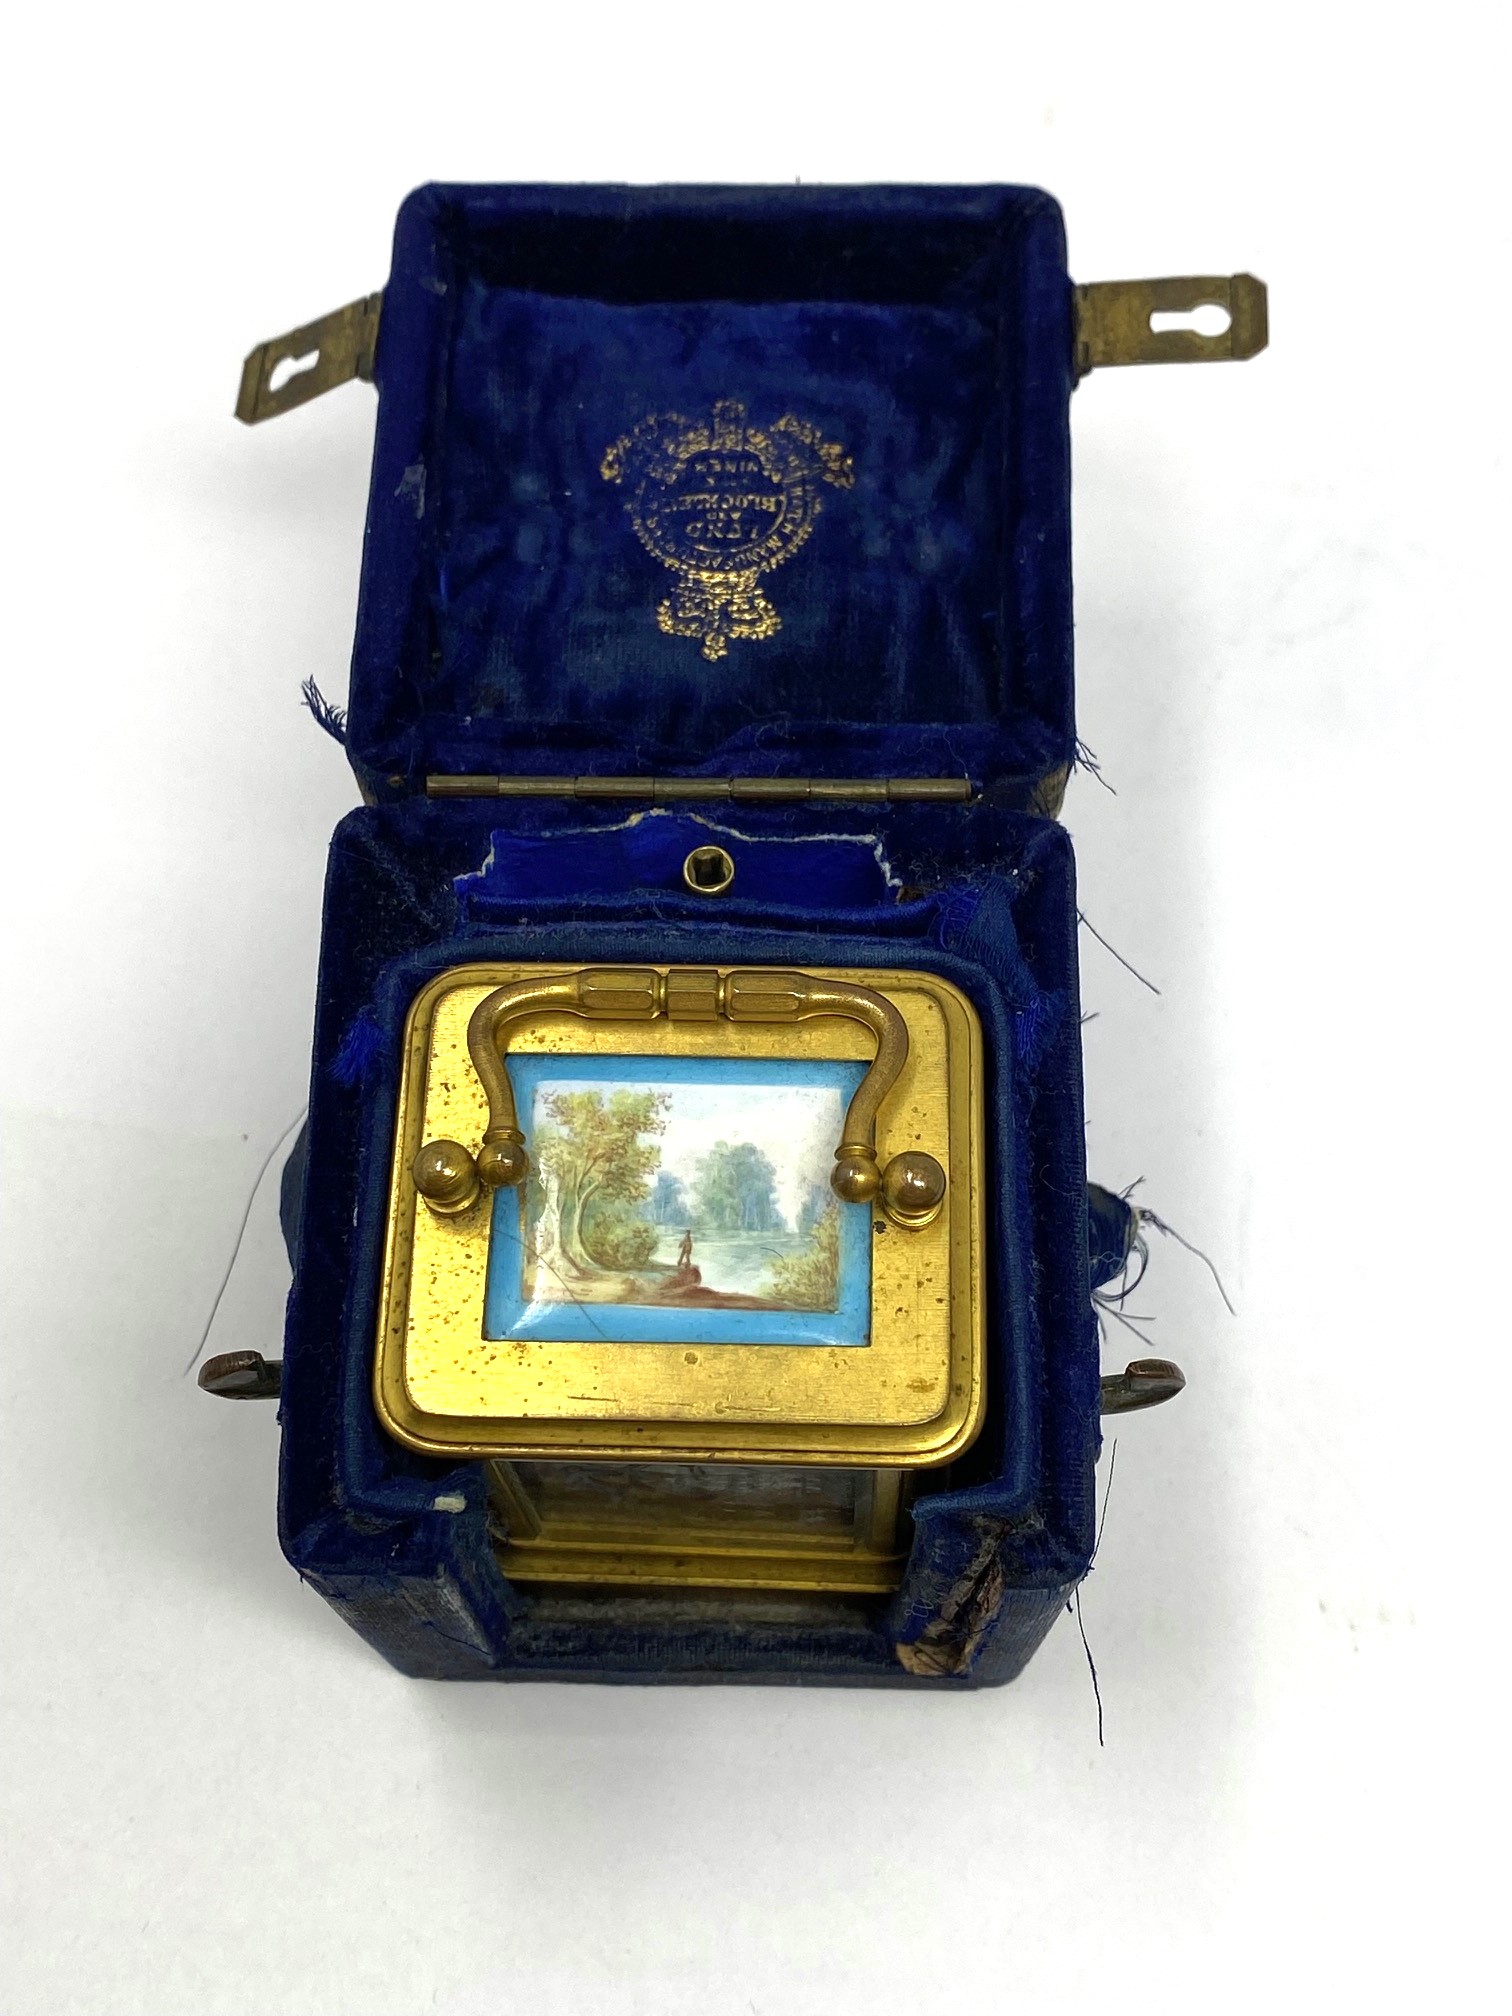 A FRENCH GILT-BRASS AND ENAMEL MINIATURE CARRIAGE CLOCK, PERHAPS J. DEJARDIN, PARIS, FOR RETAIL BY - Image 2 of 8